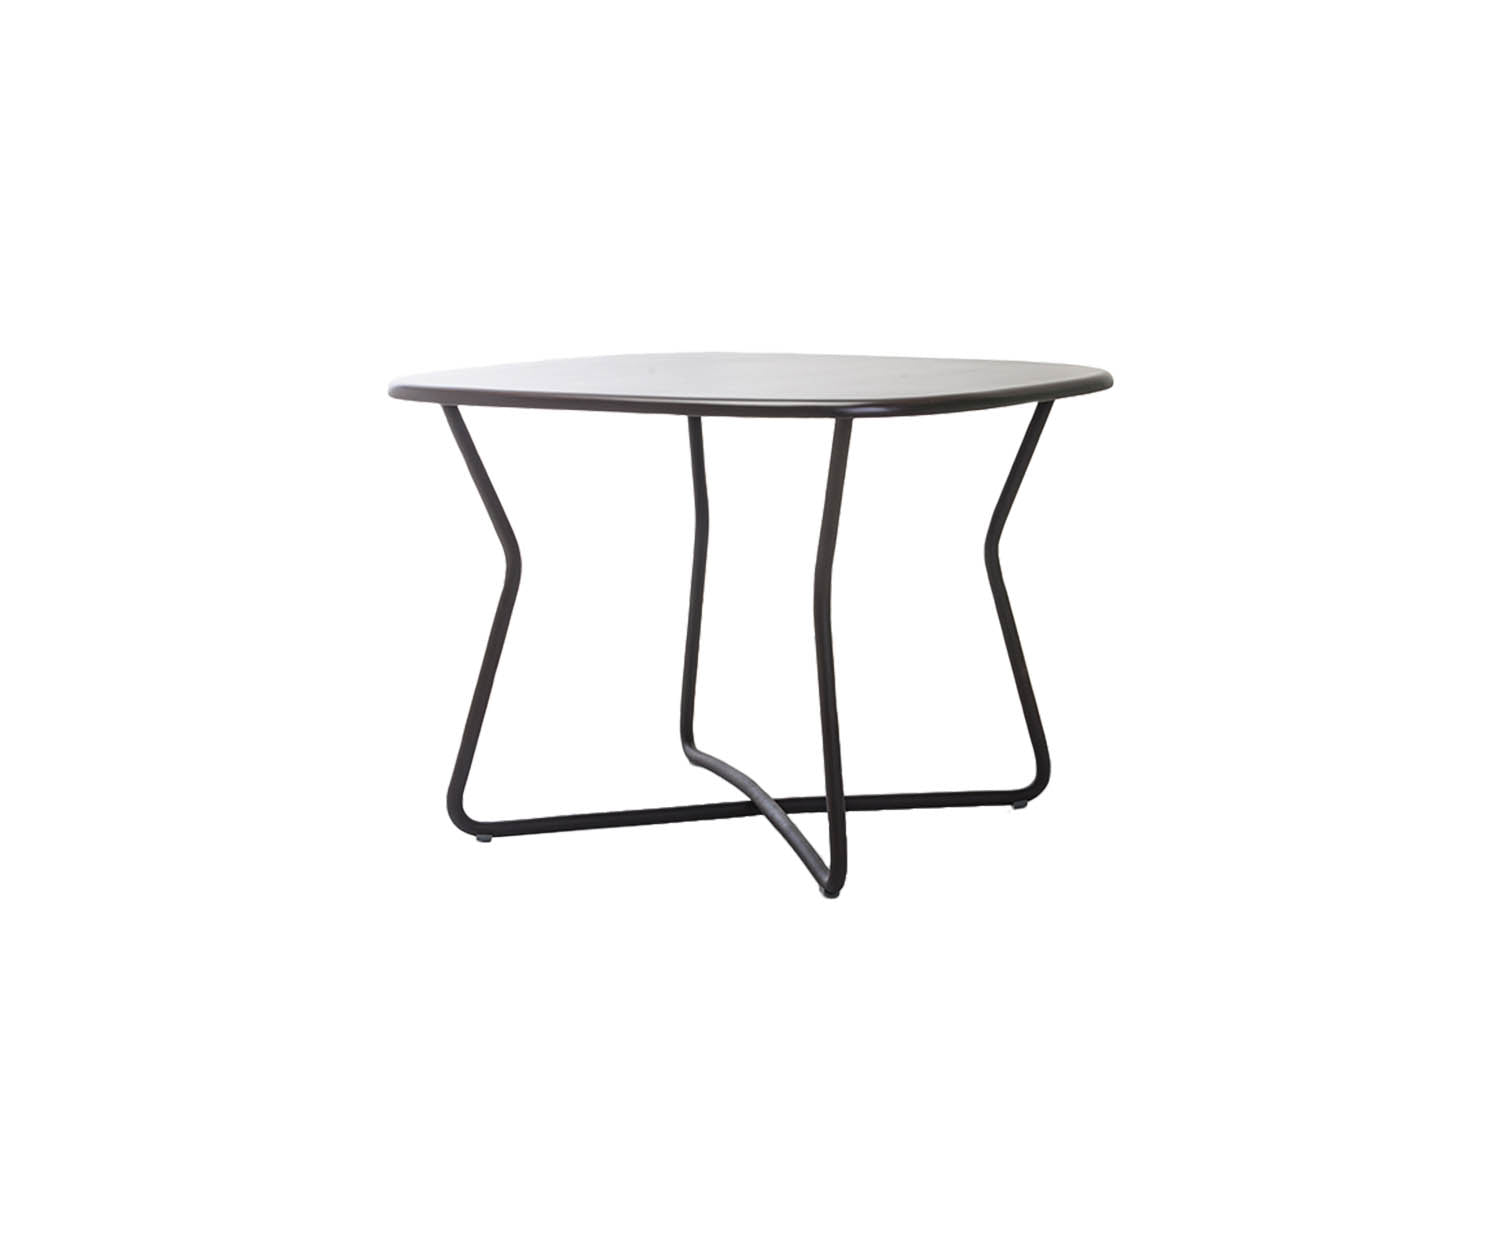 Kenneth Cobonpue, Adeso Dining Table